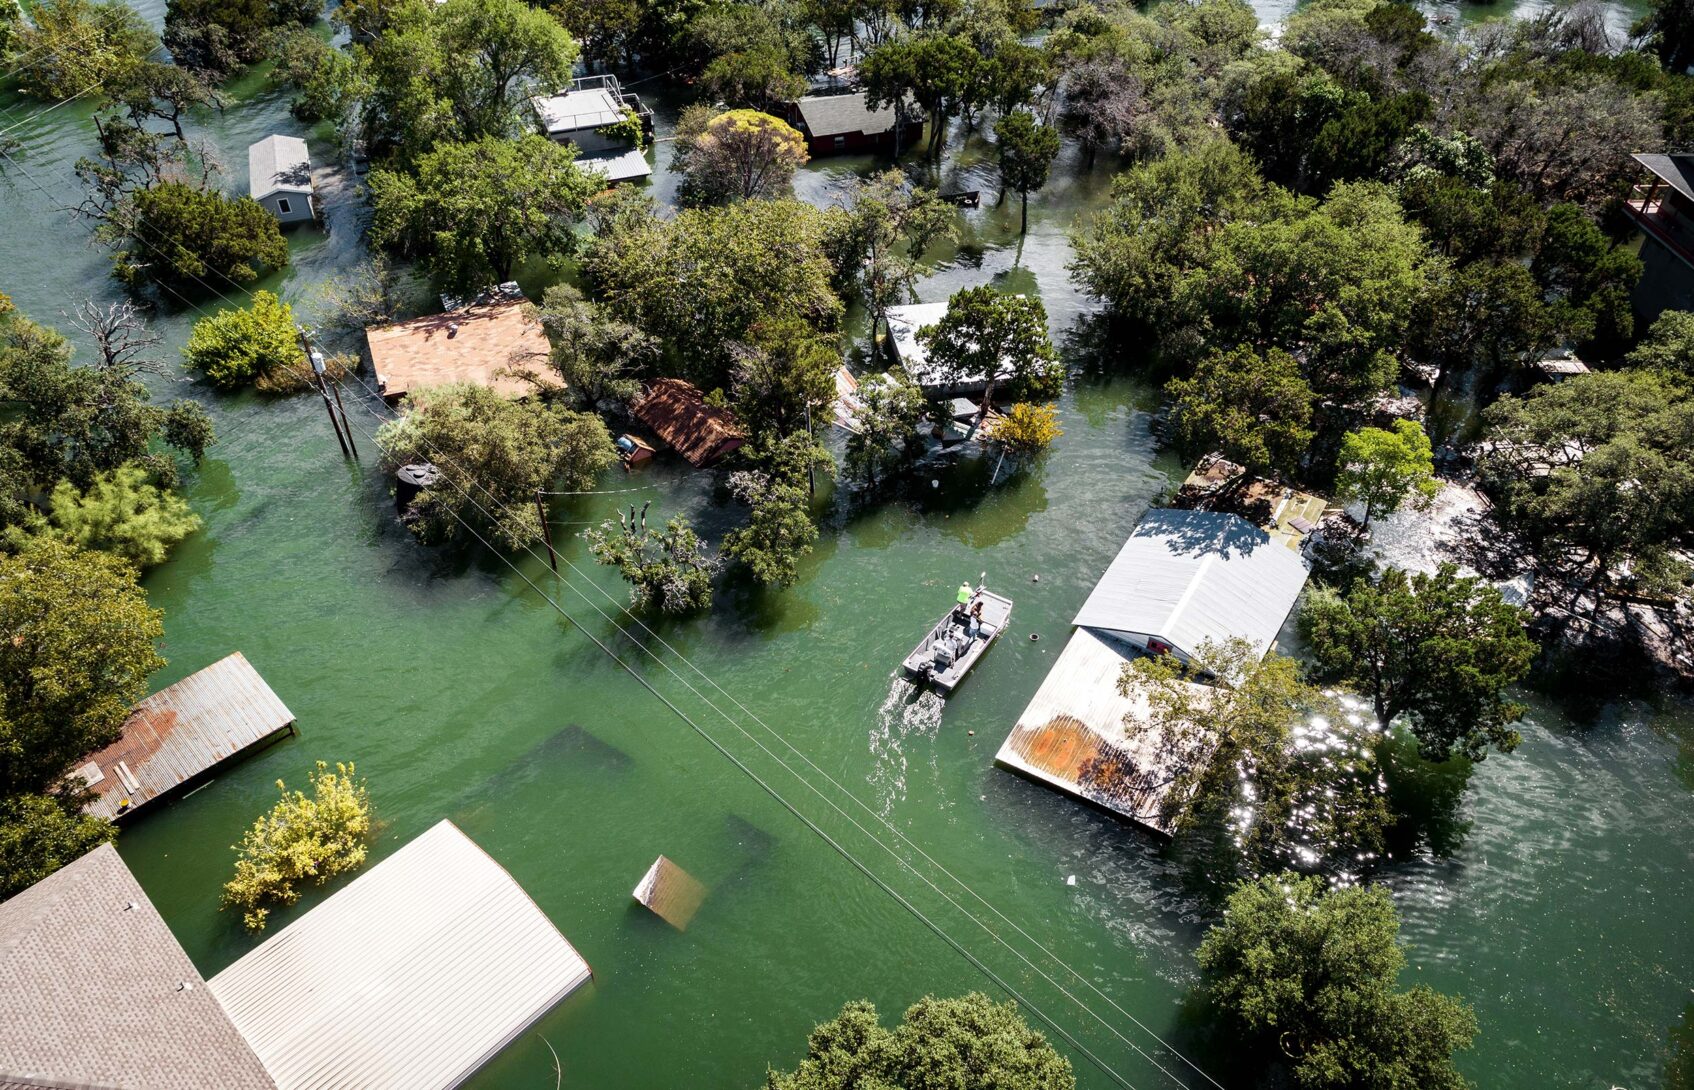 An aerial view of roofs and trees in a flooded neighborhood